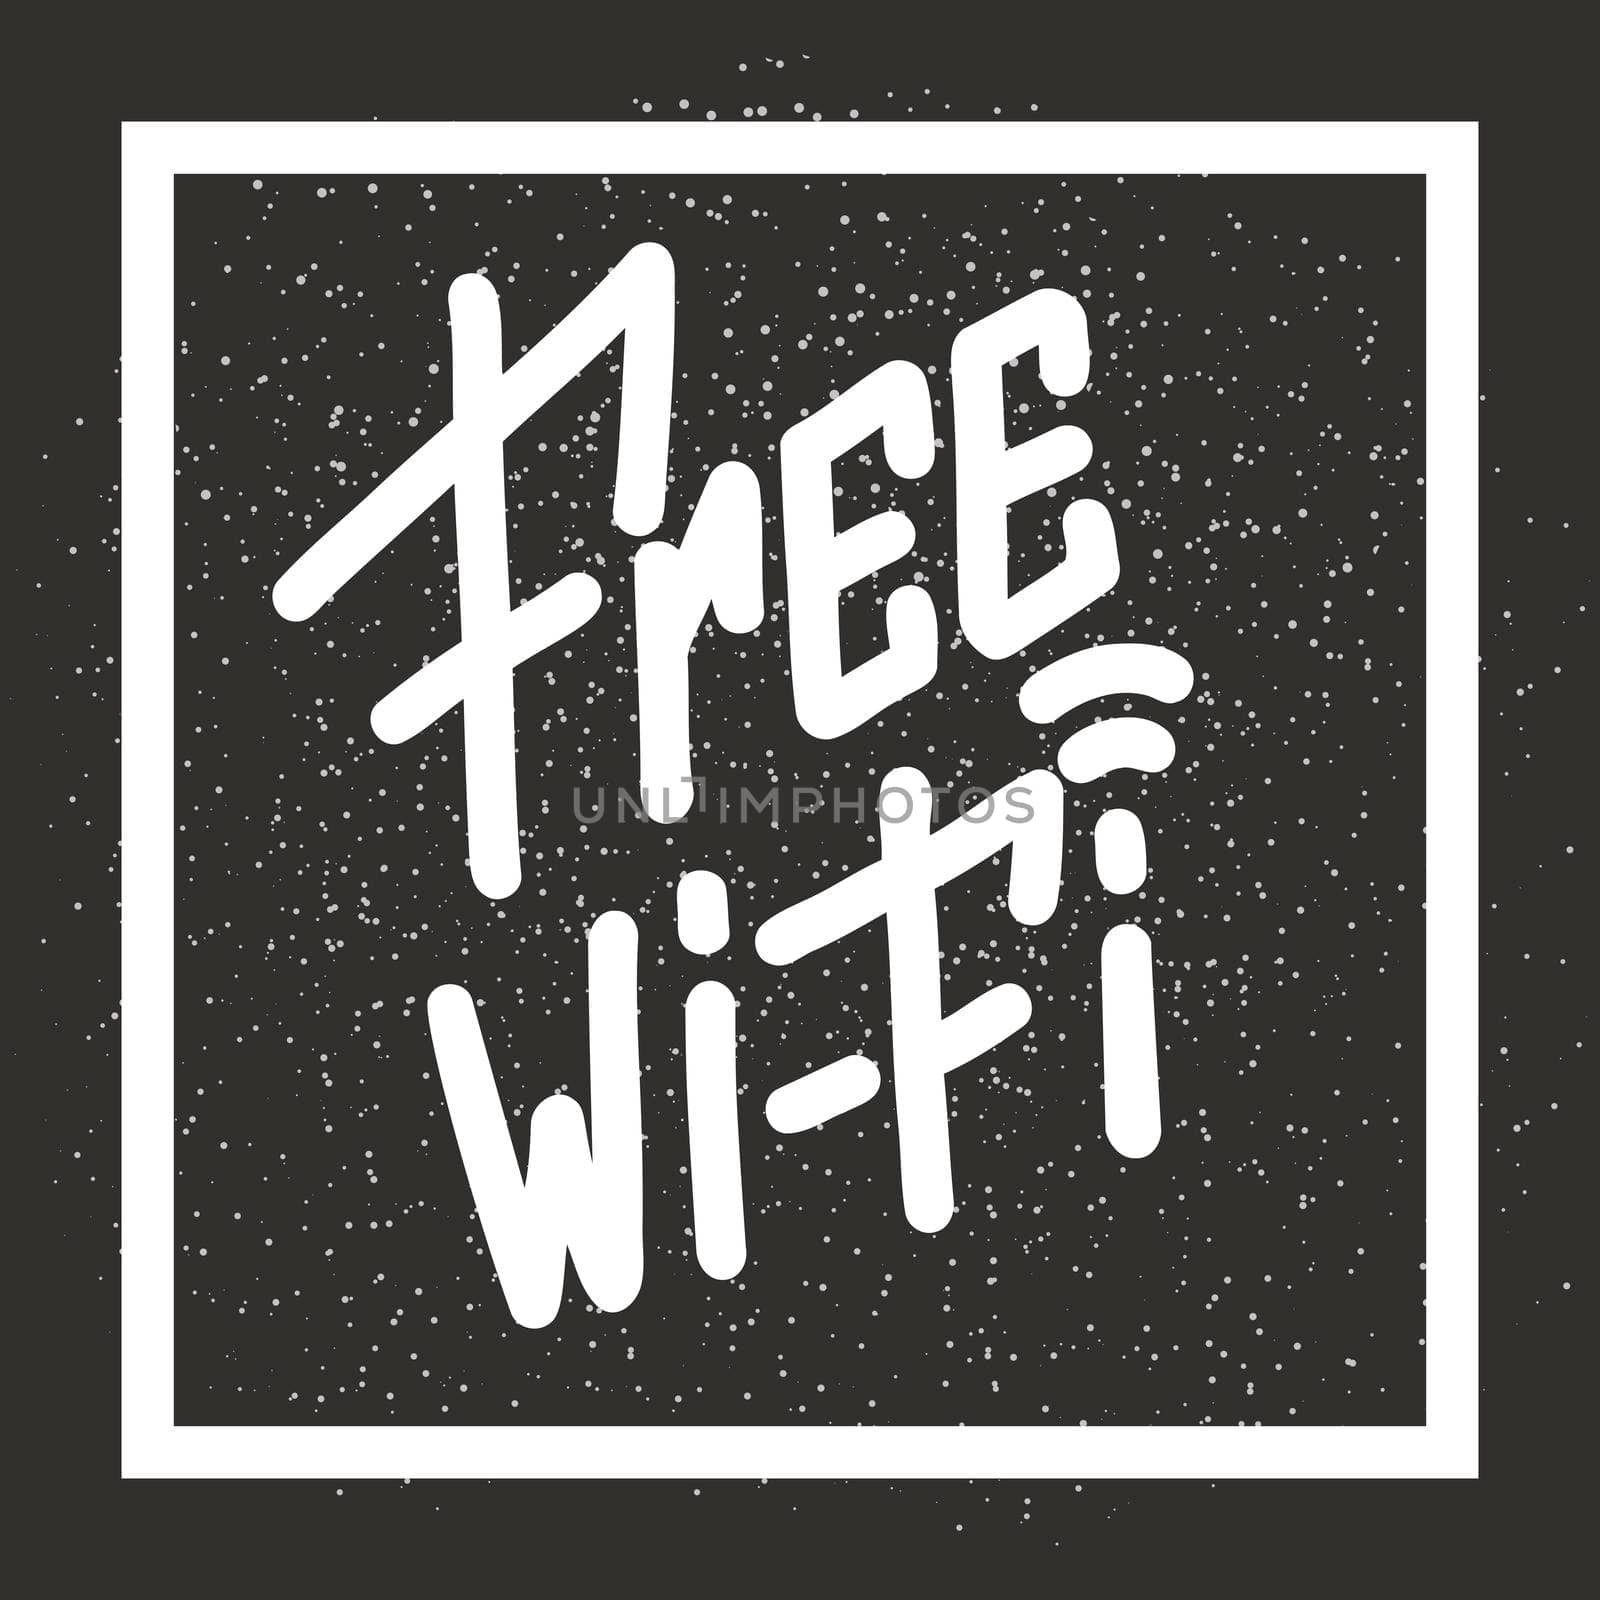 Free wi-fi. Handwritten lettering on dark background. illustration for posters, cards and much more.